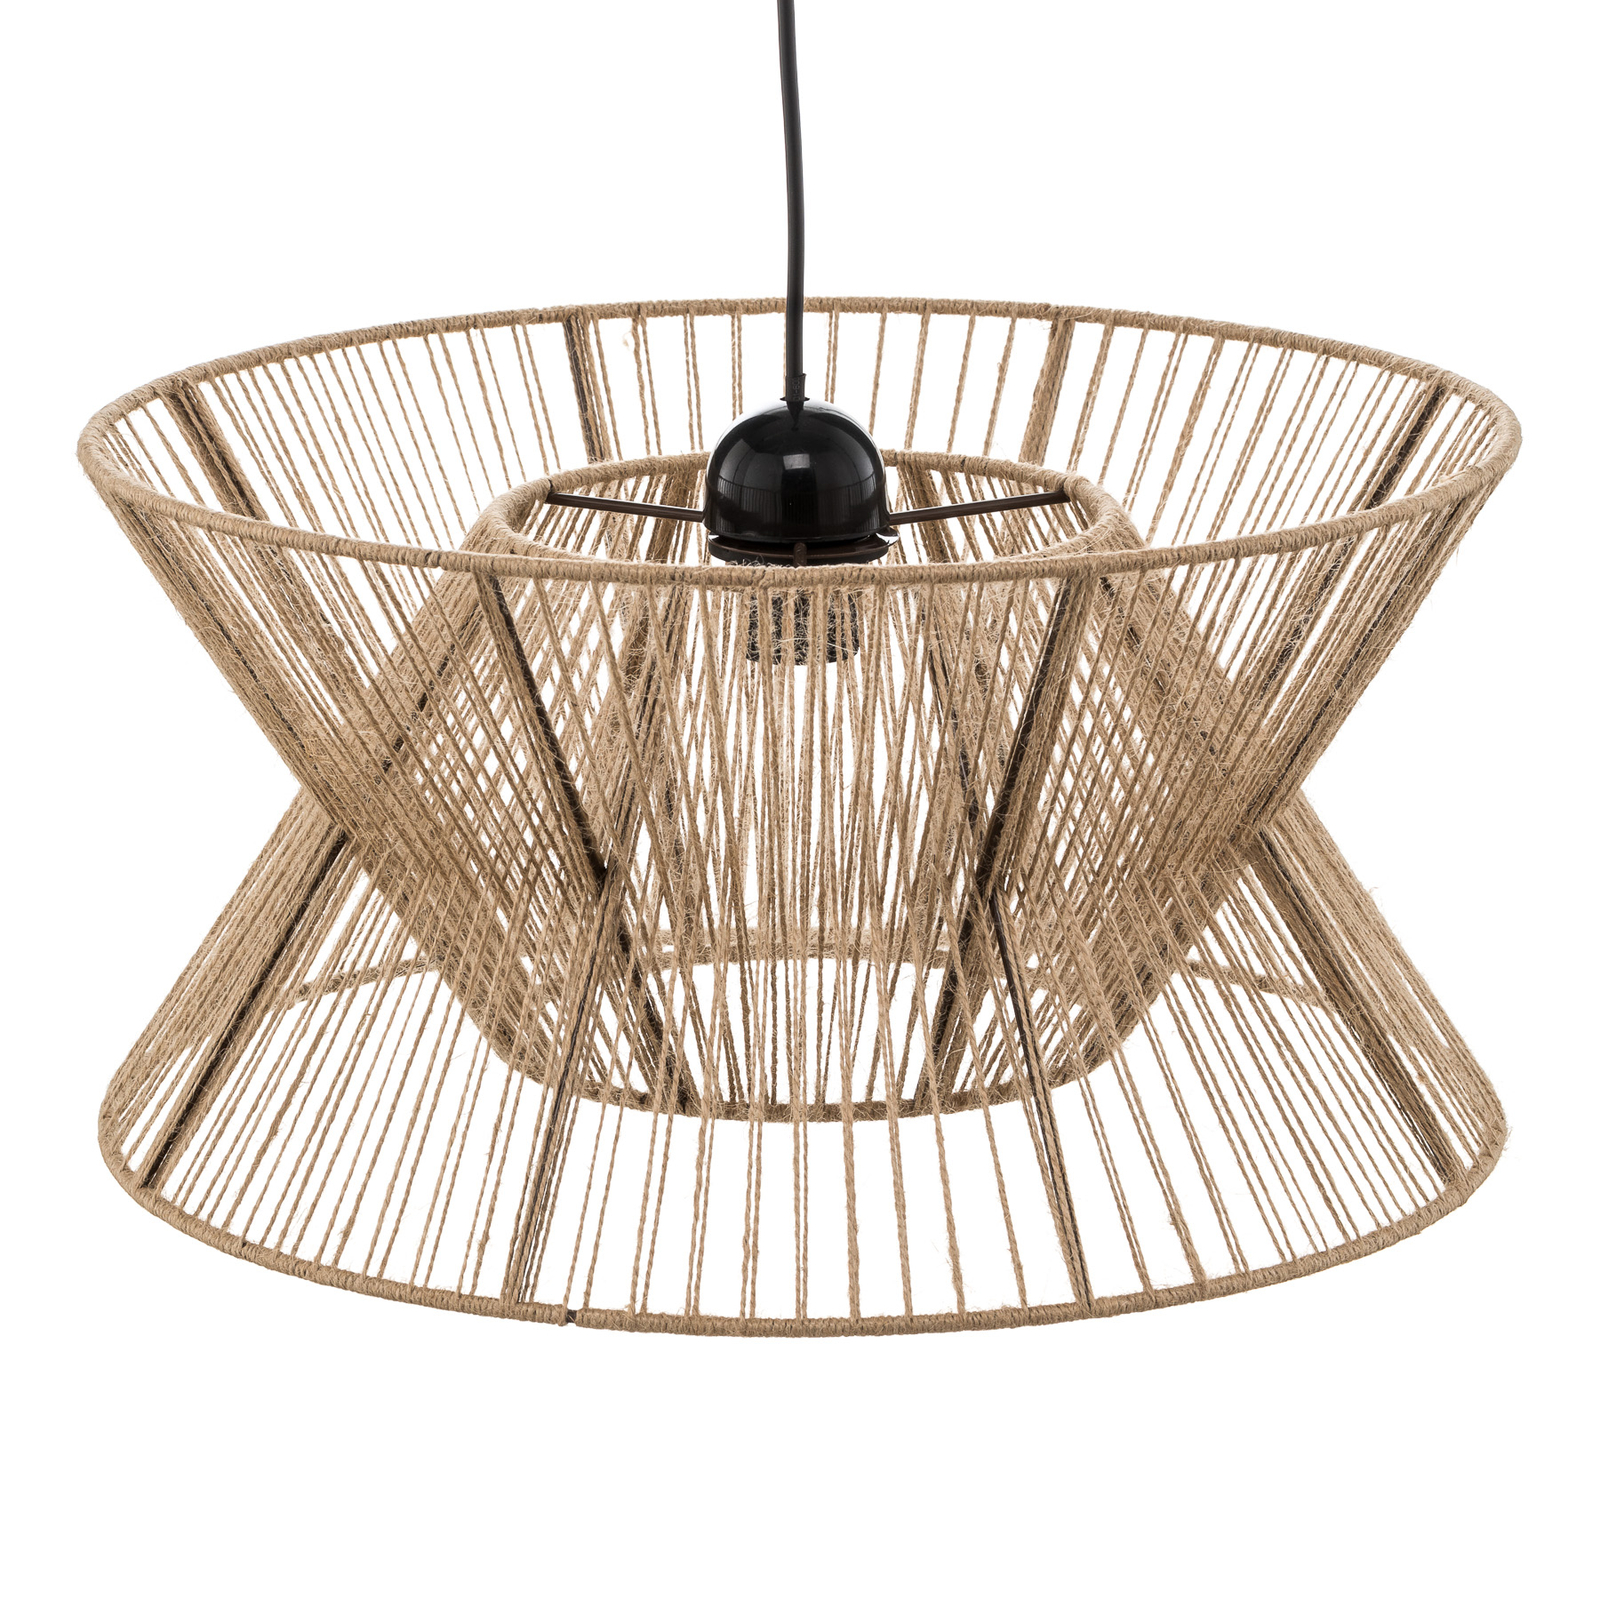 Argela hanging light with dual lampshade, natural